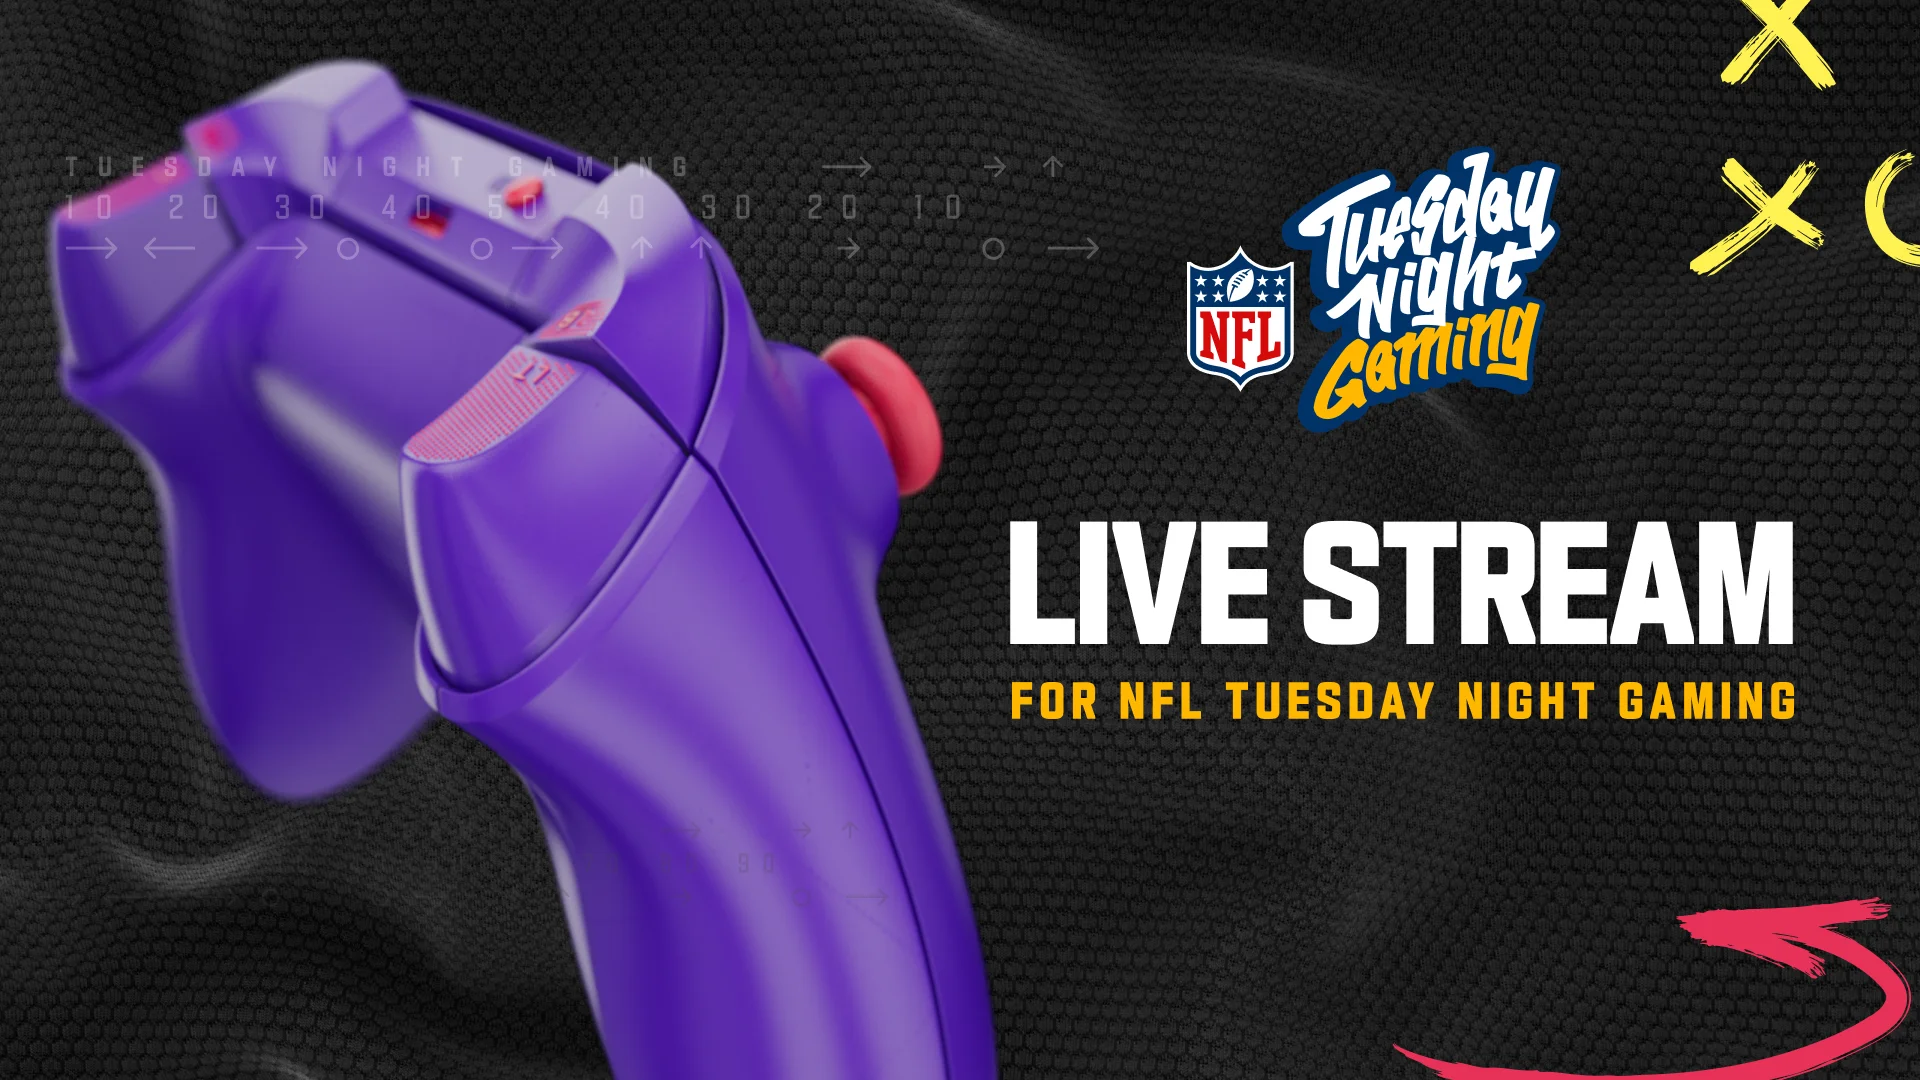 Live stream for NFL Tuesday Night Gaming